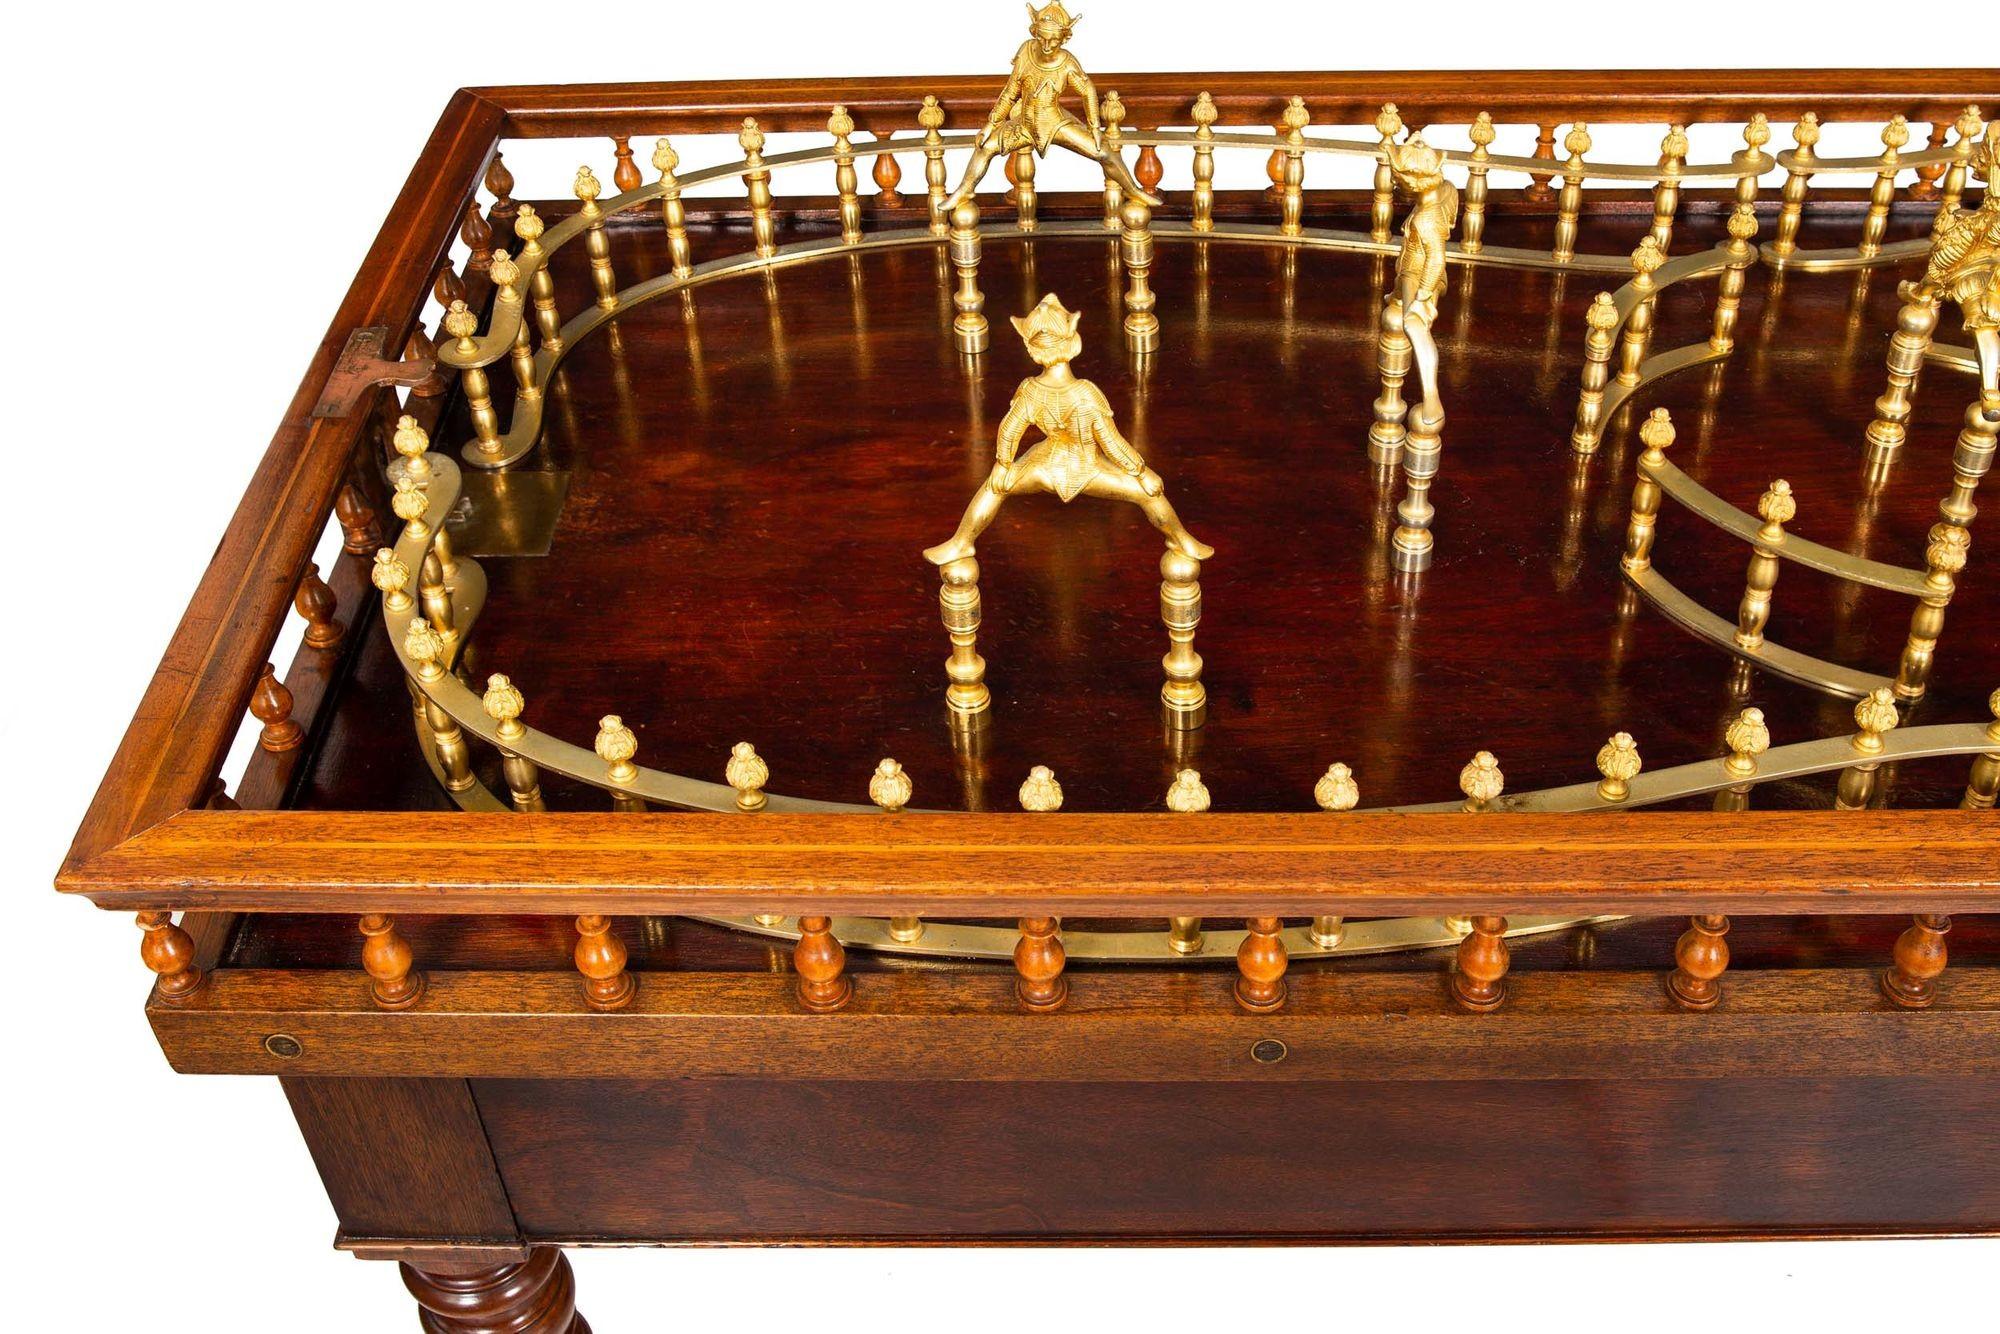 19th Century English Victorian Mahogany Antique Skittles Game Table For Sale